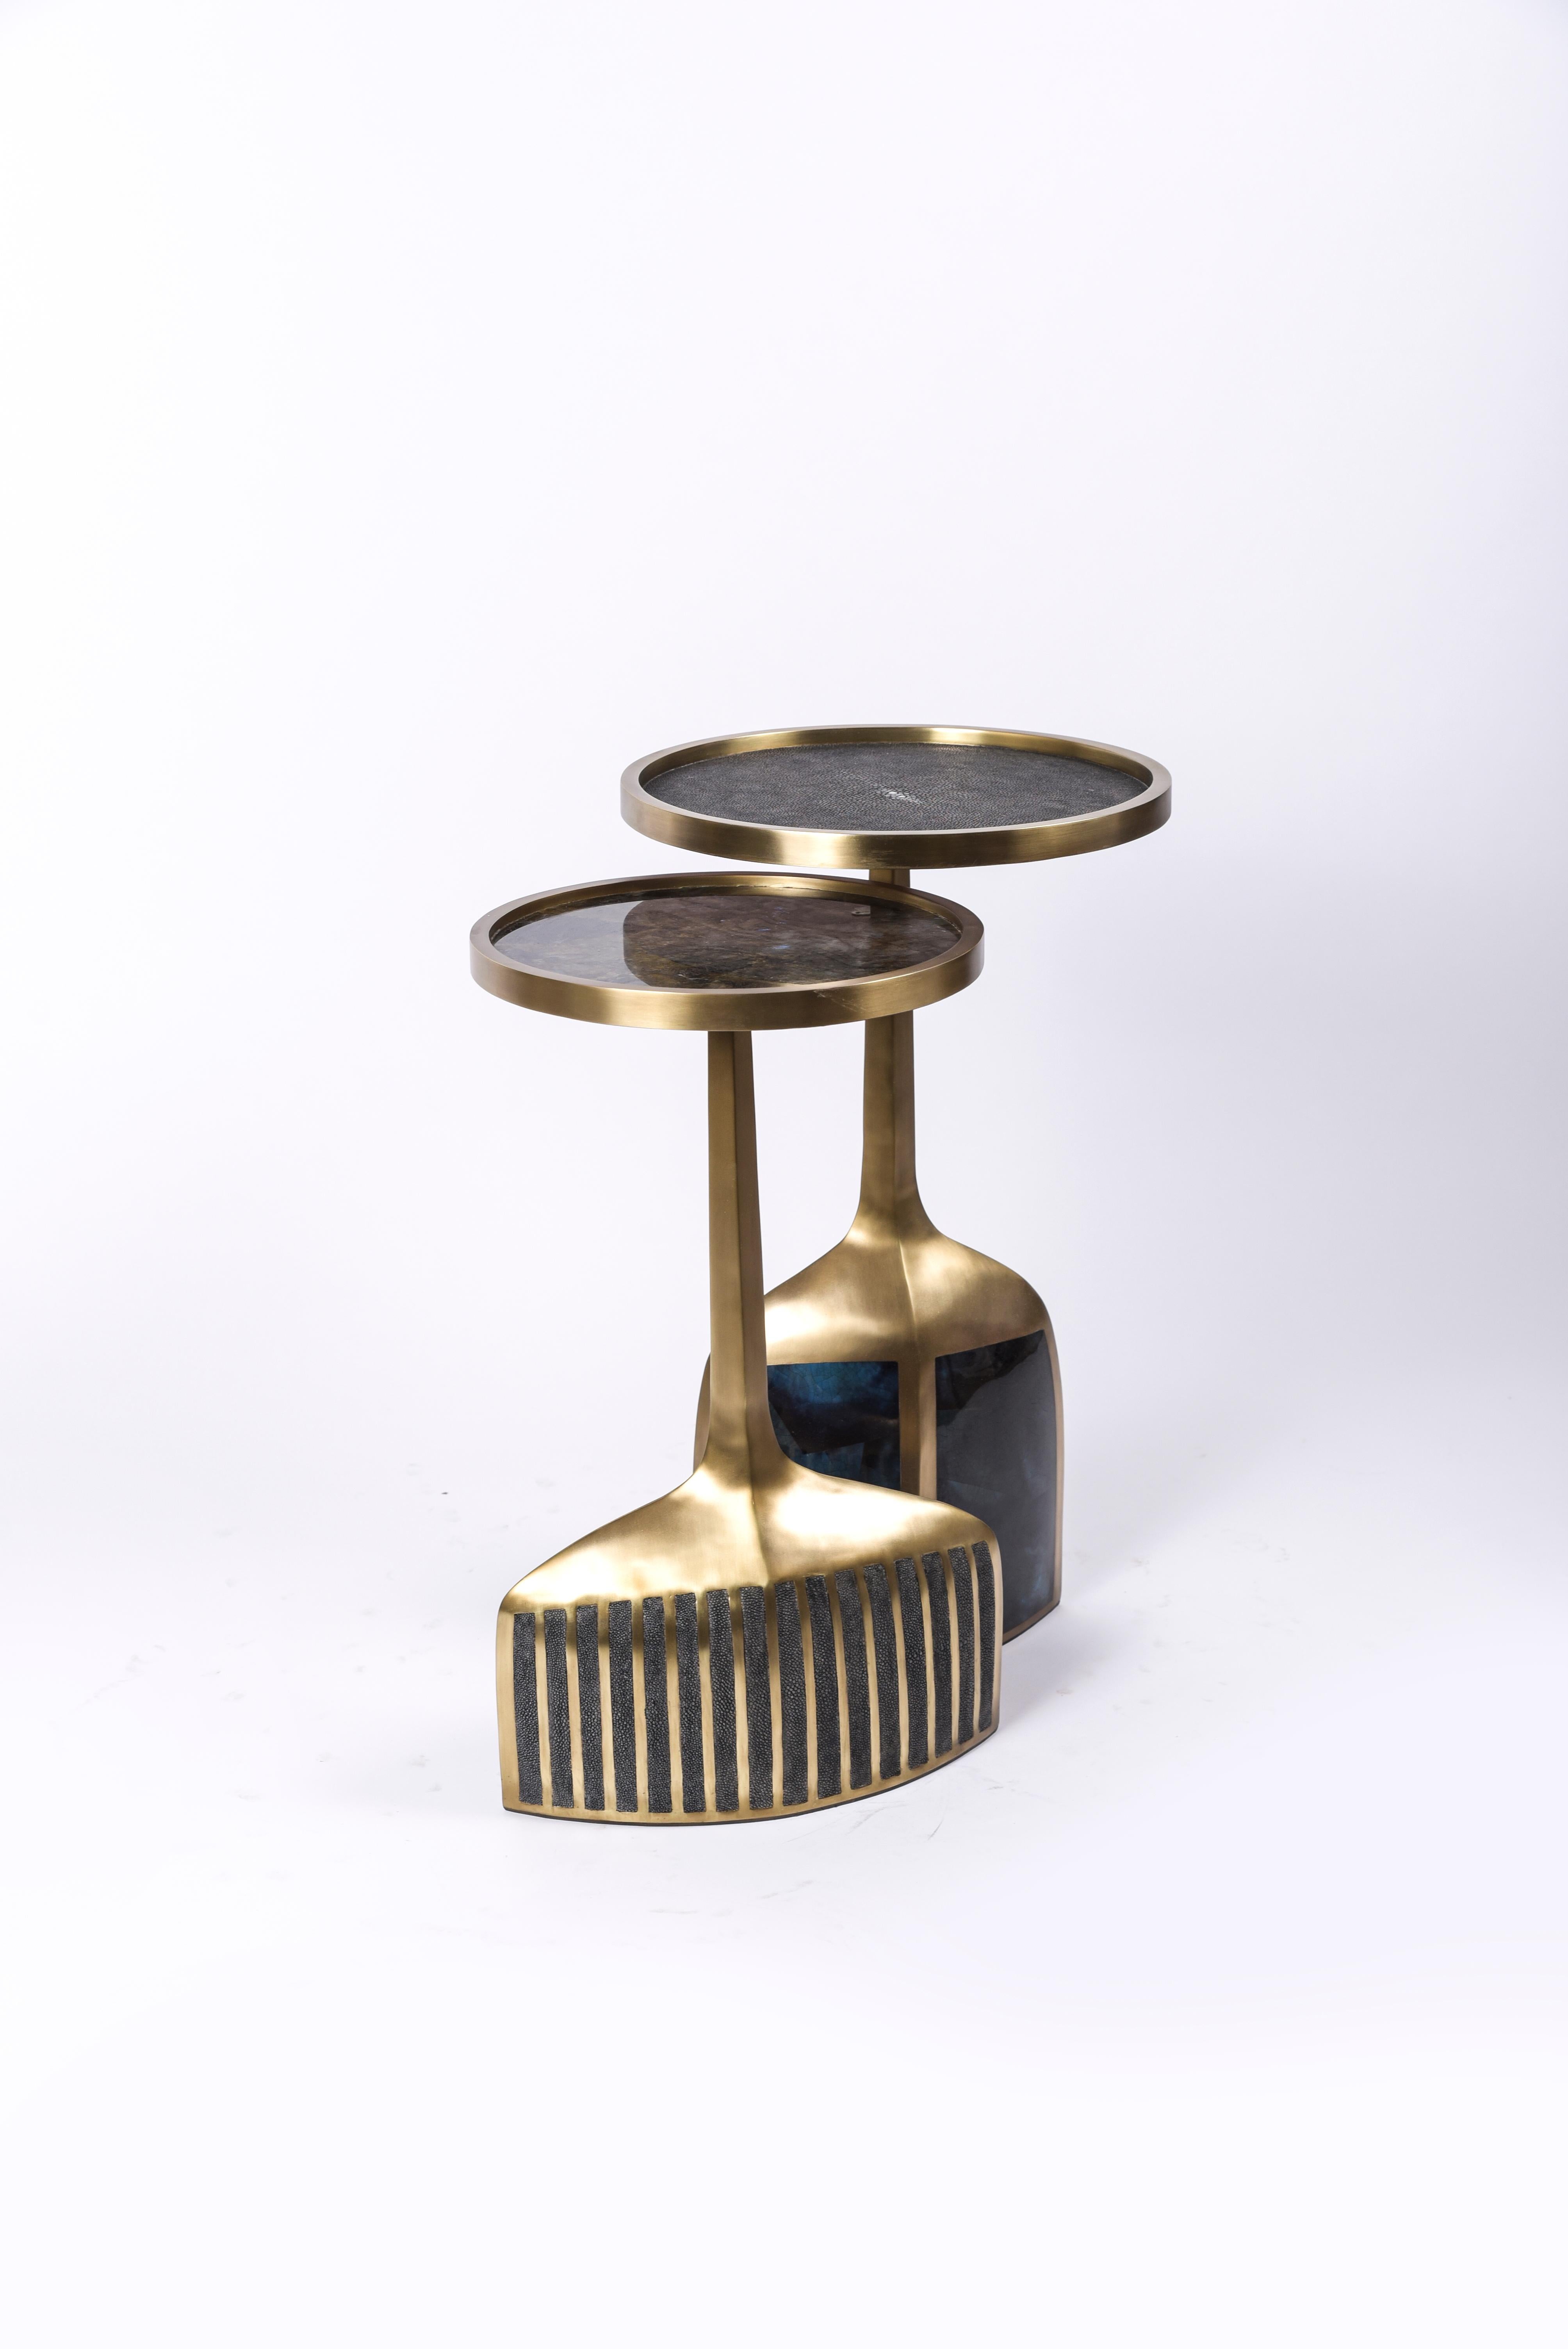 The pedestal side table in small and large are the perfect nesting accent pieces due to their sleek and light aesthetic. The large size is inlaid on the top surface with coal black shagreen, the bottom part a mixture of blue pen shell and bronze